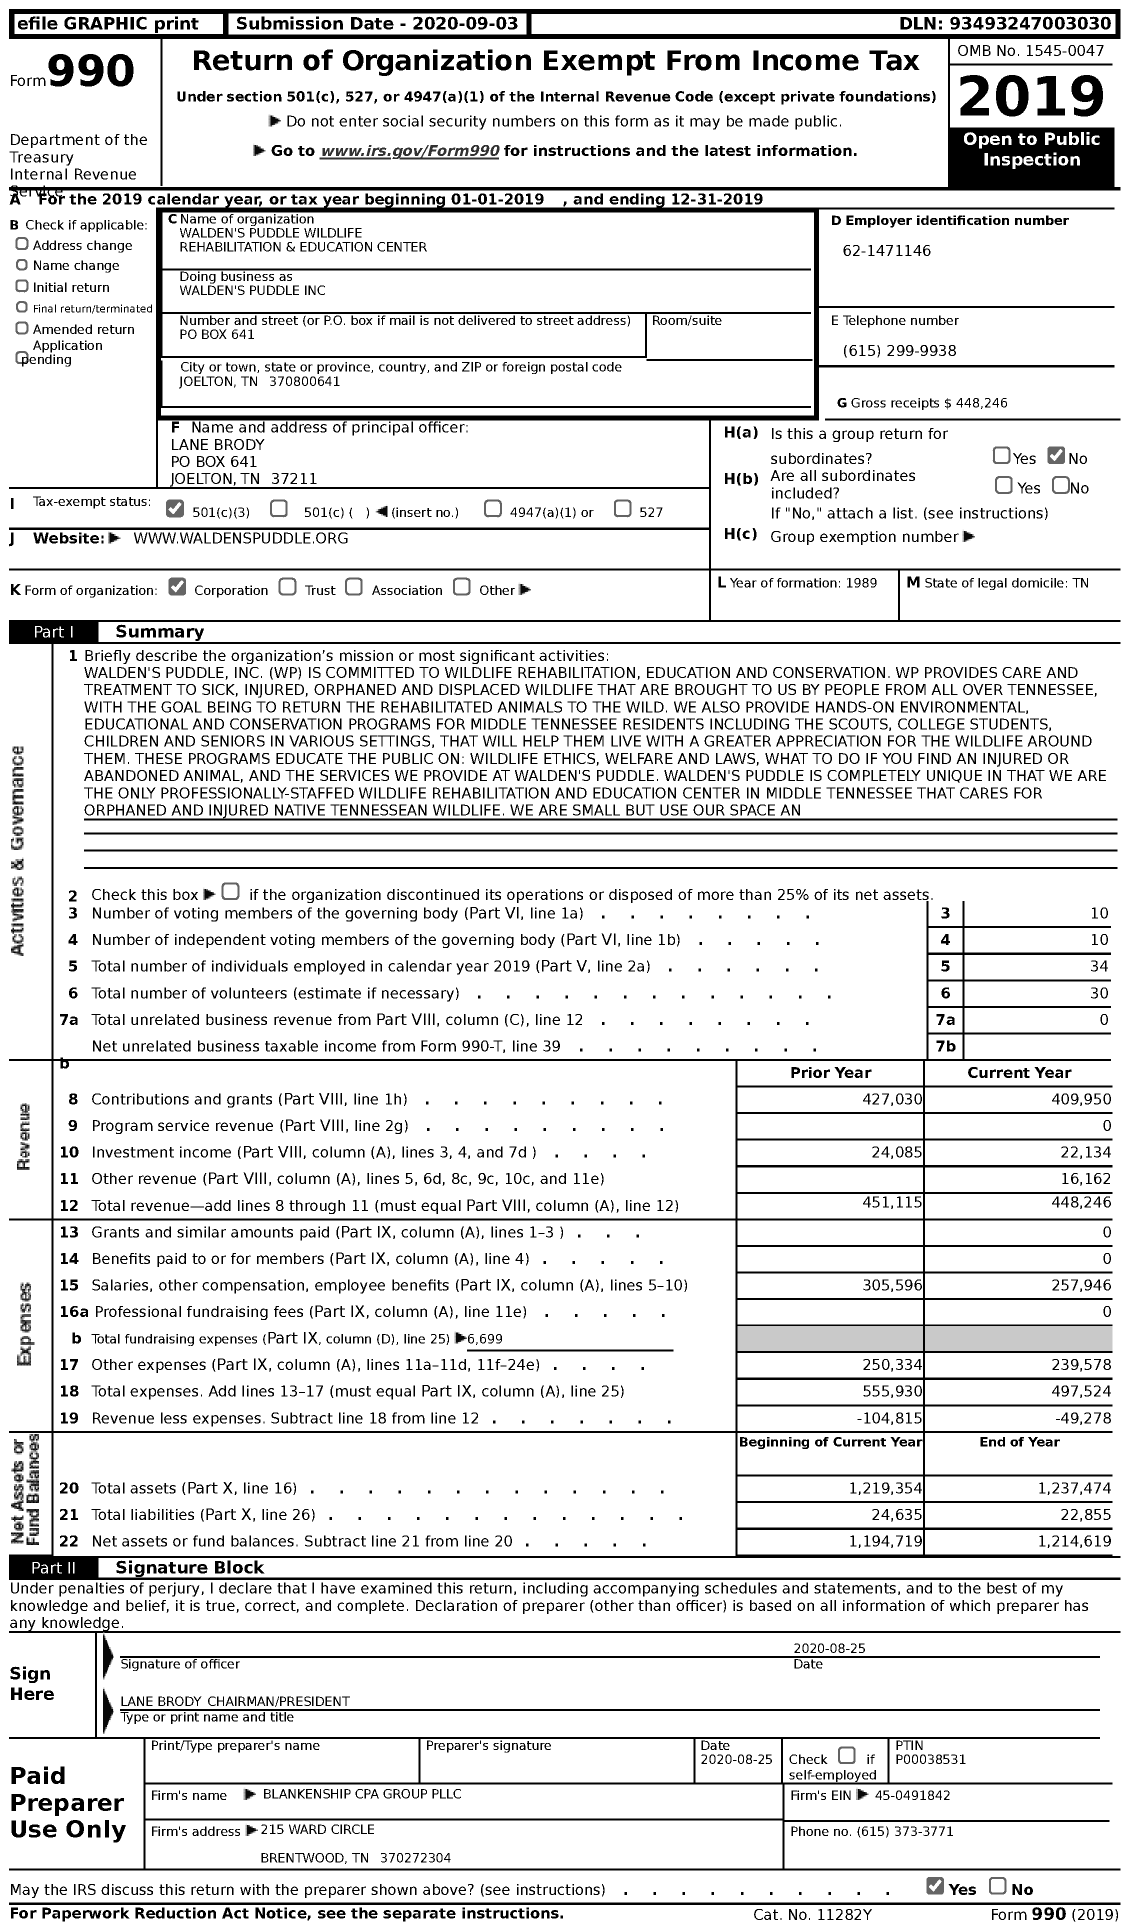 Image of first page of 2019 Form 990 for Walden's Puddle